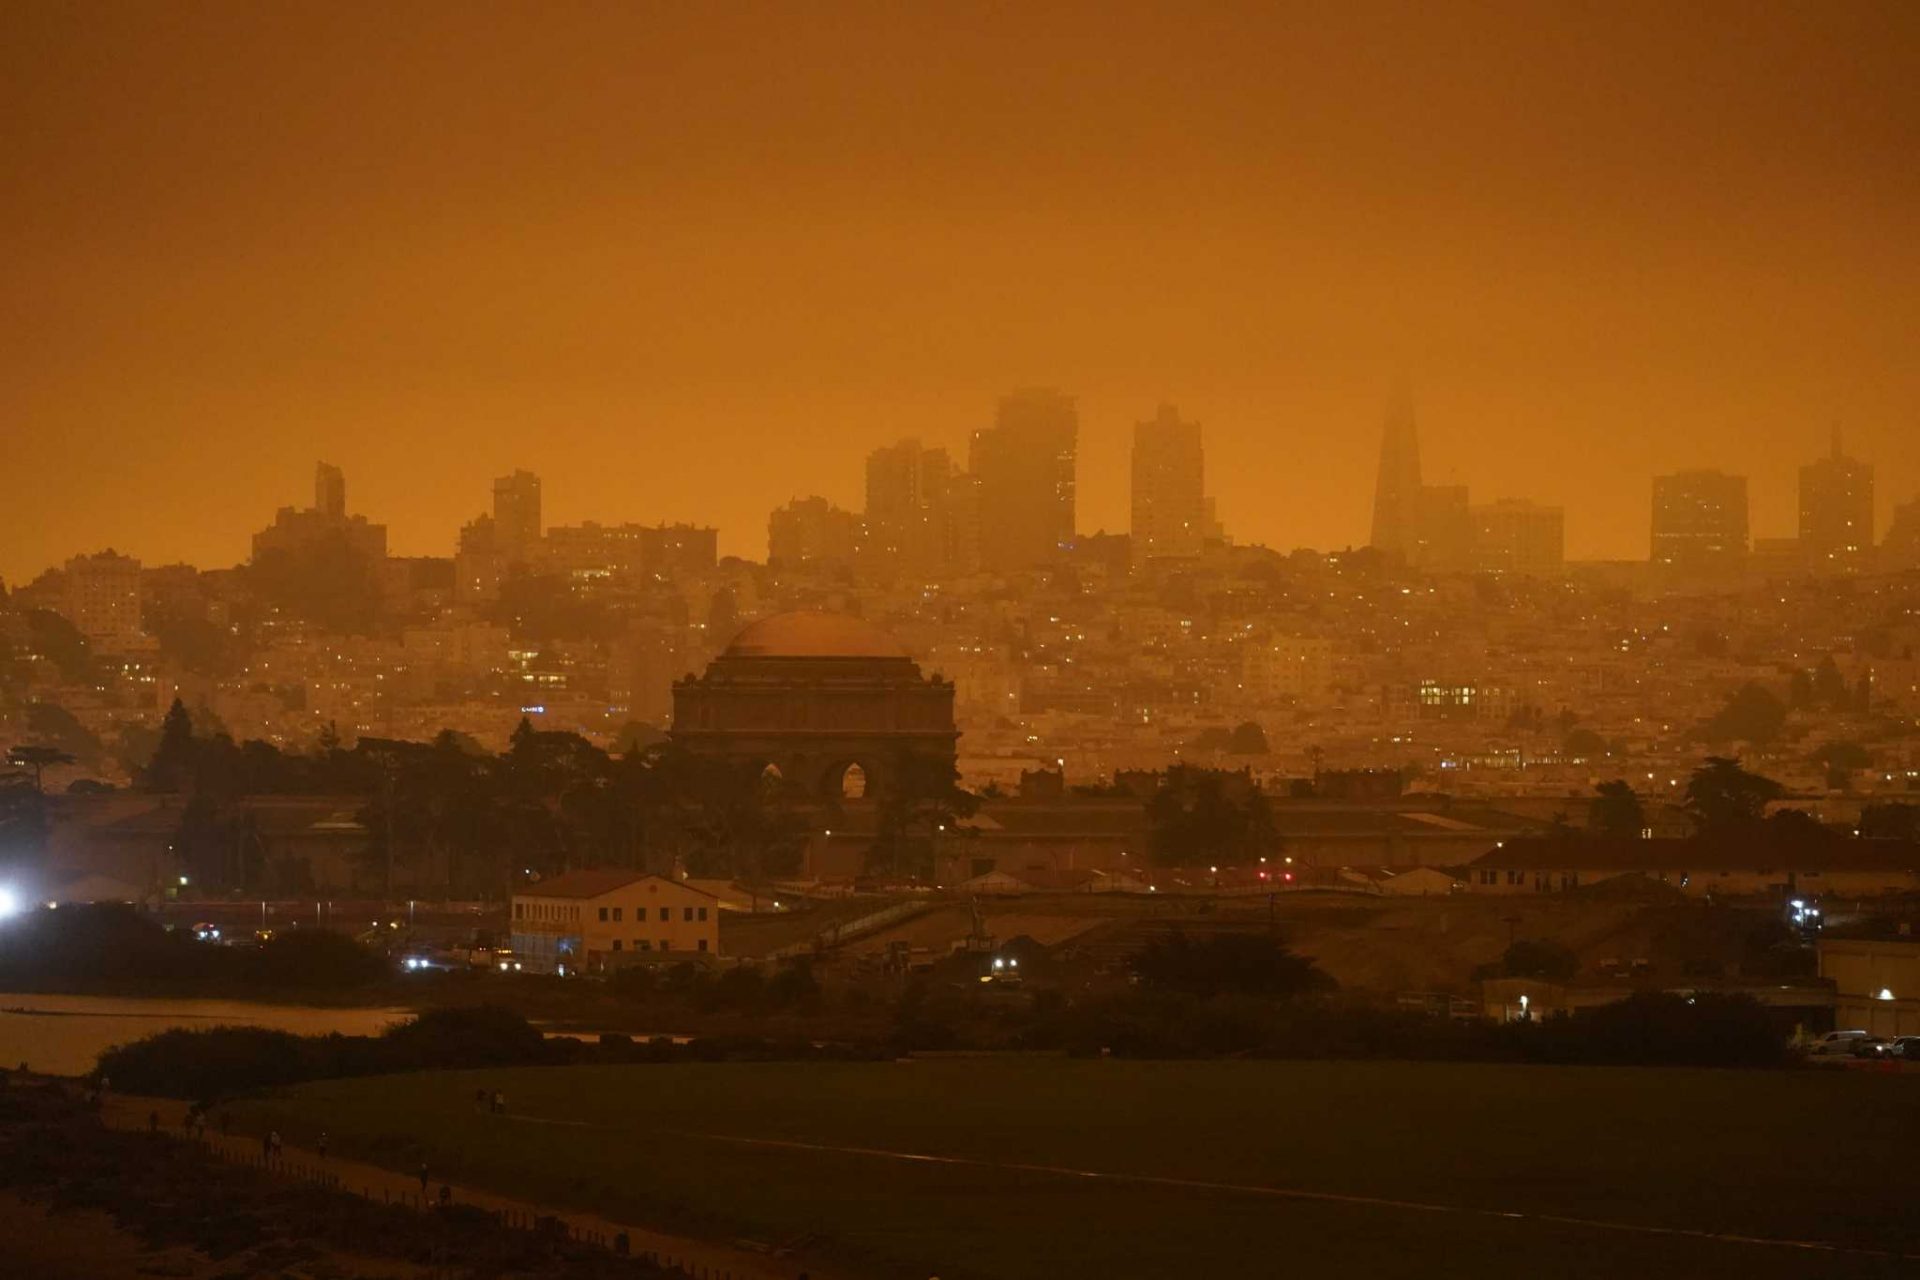 Wildfire smoke in US exposes millions to unsafe air pollution